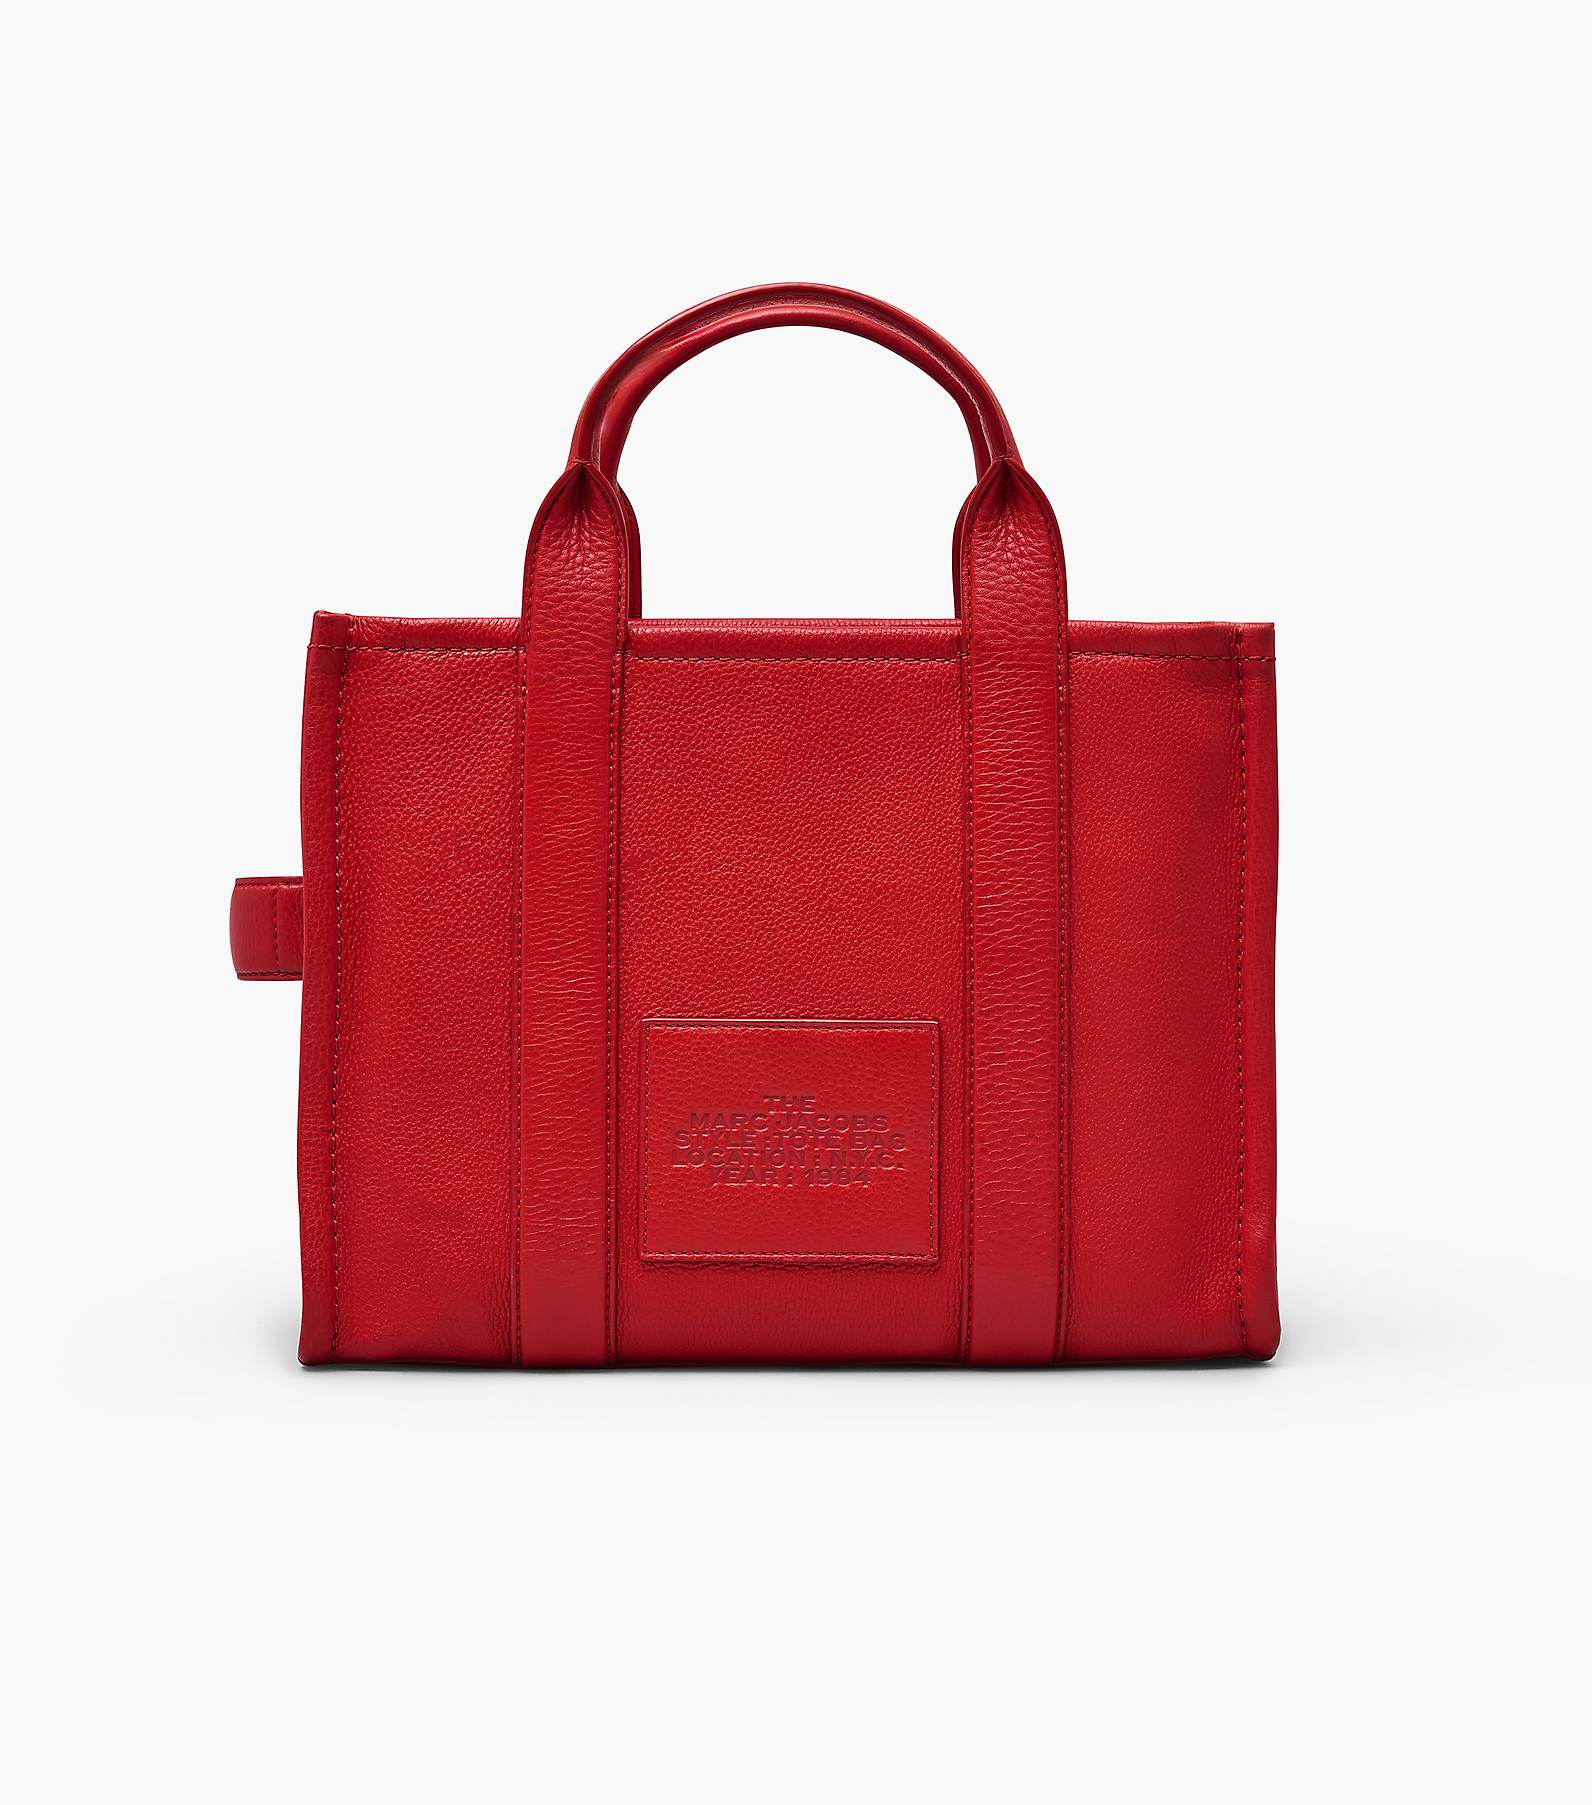 The Leather Medium Tote Bag | Marc Jacobs | Official Site